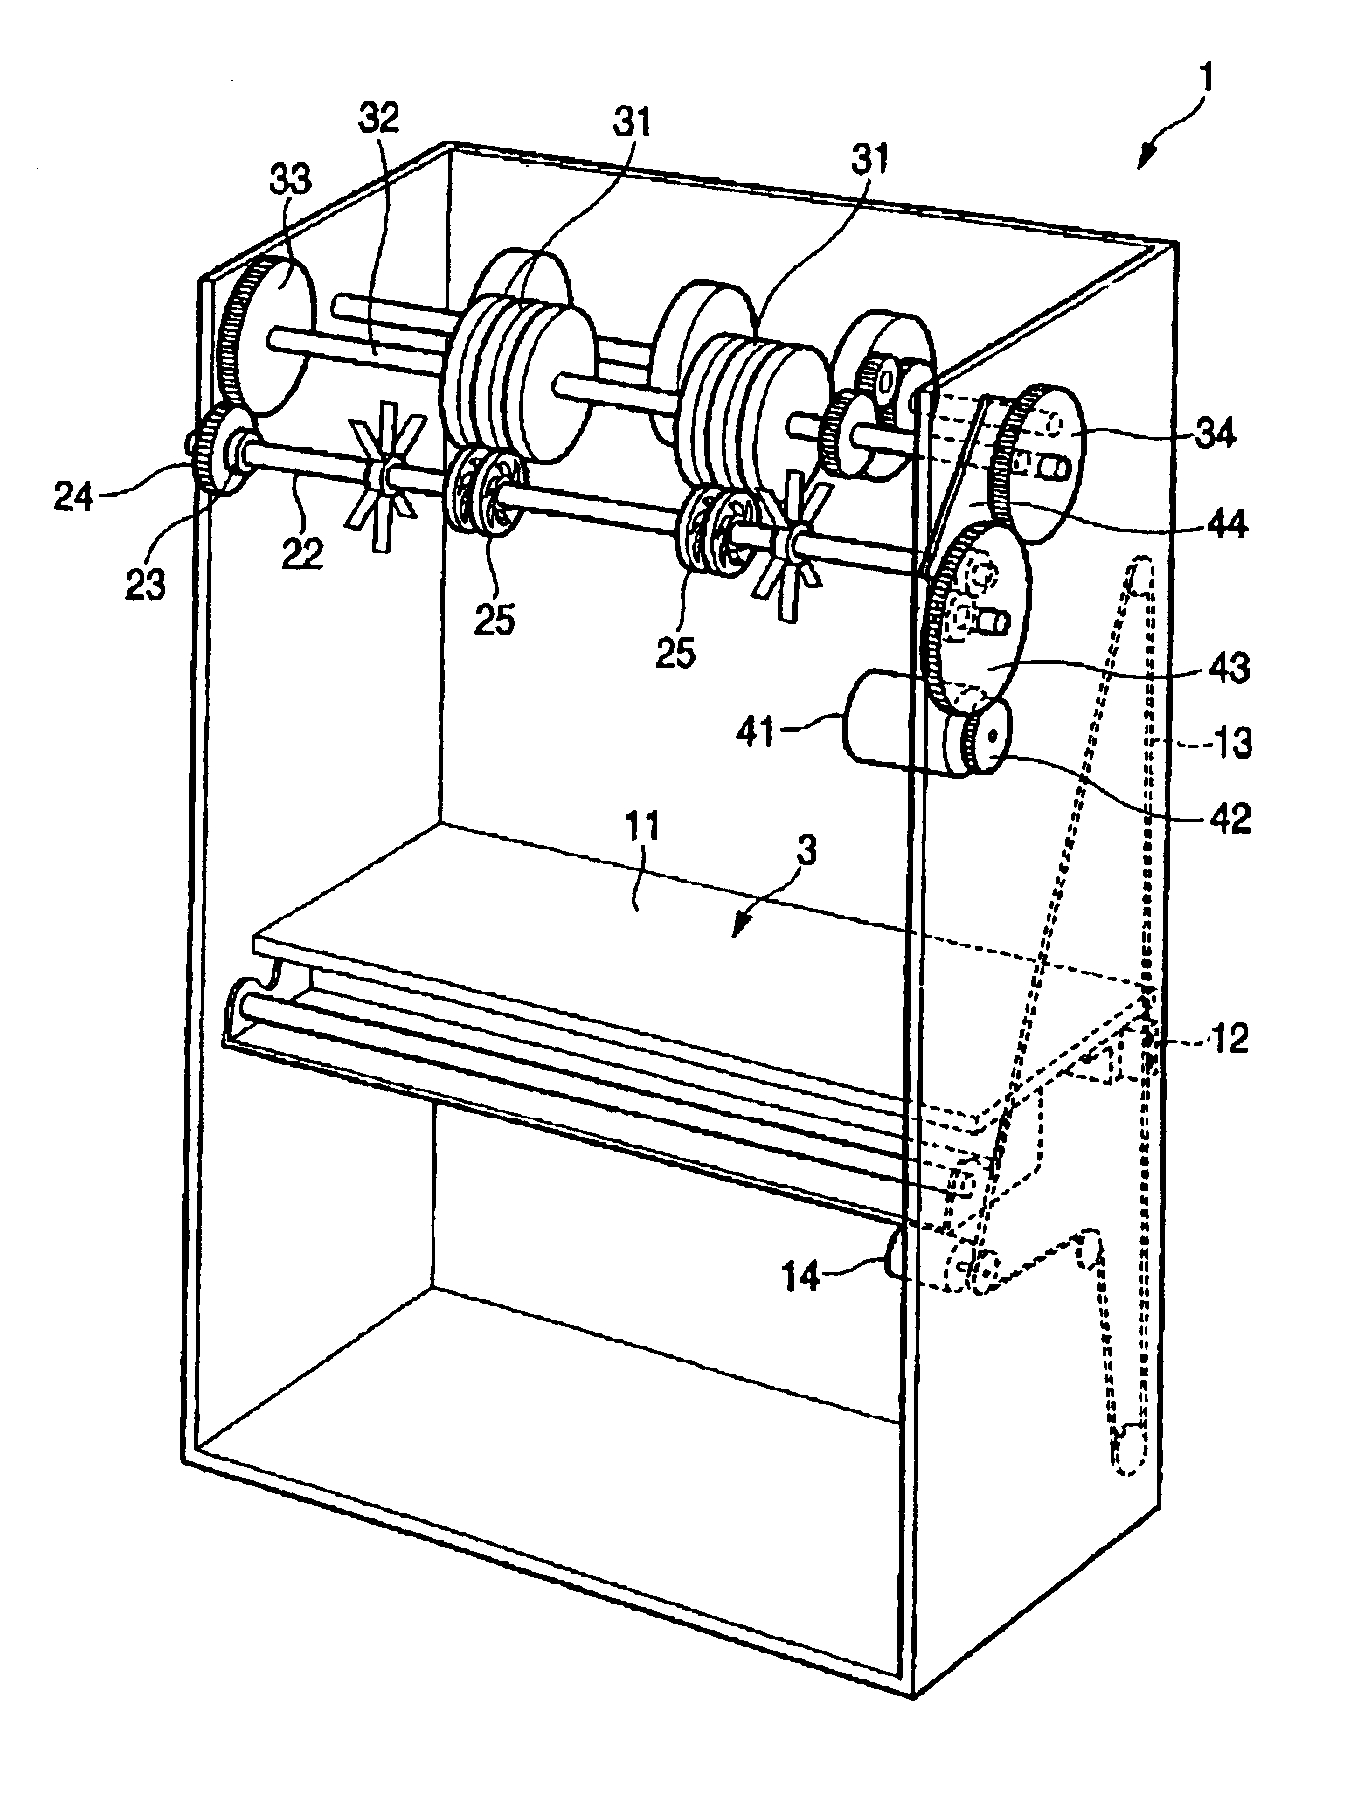 Roller and sheet delivery unit